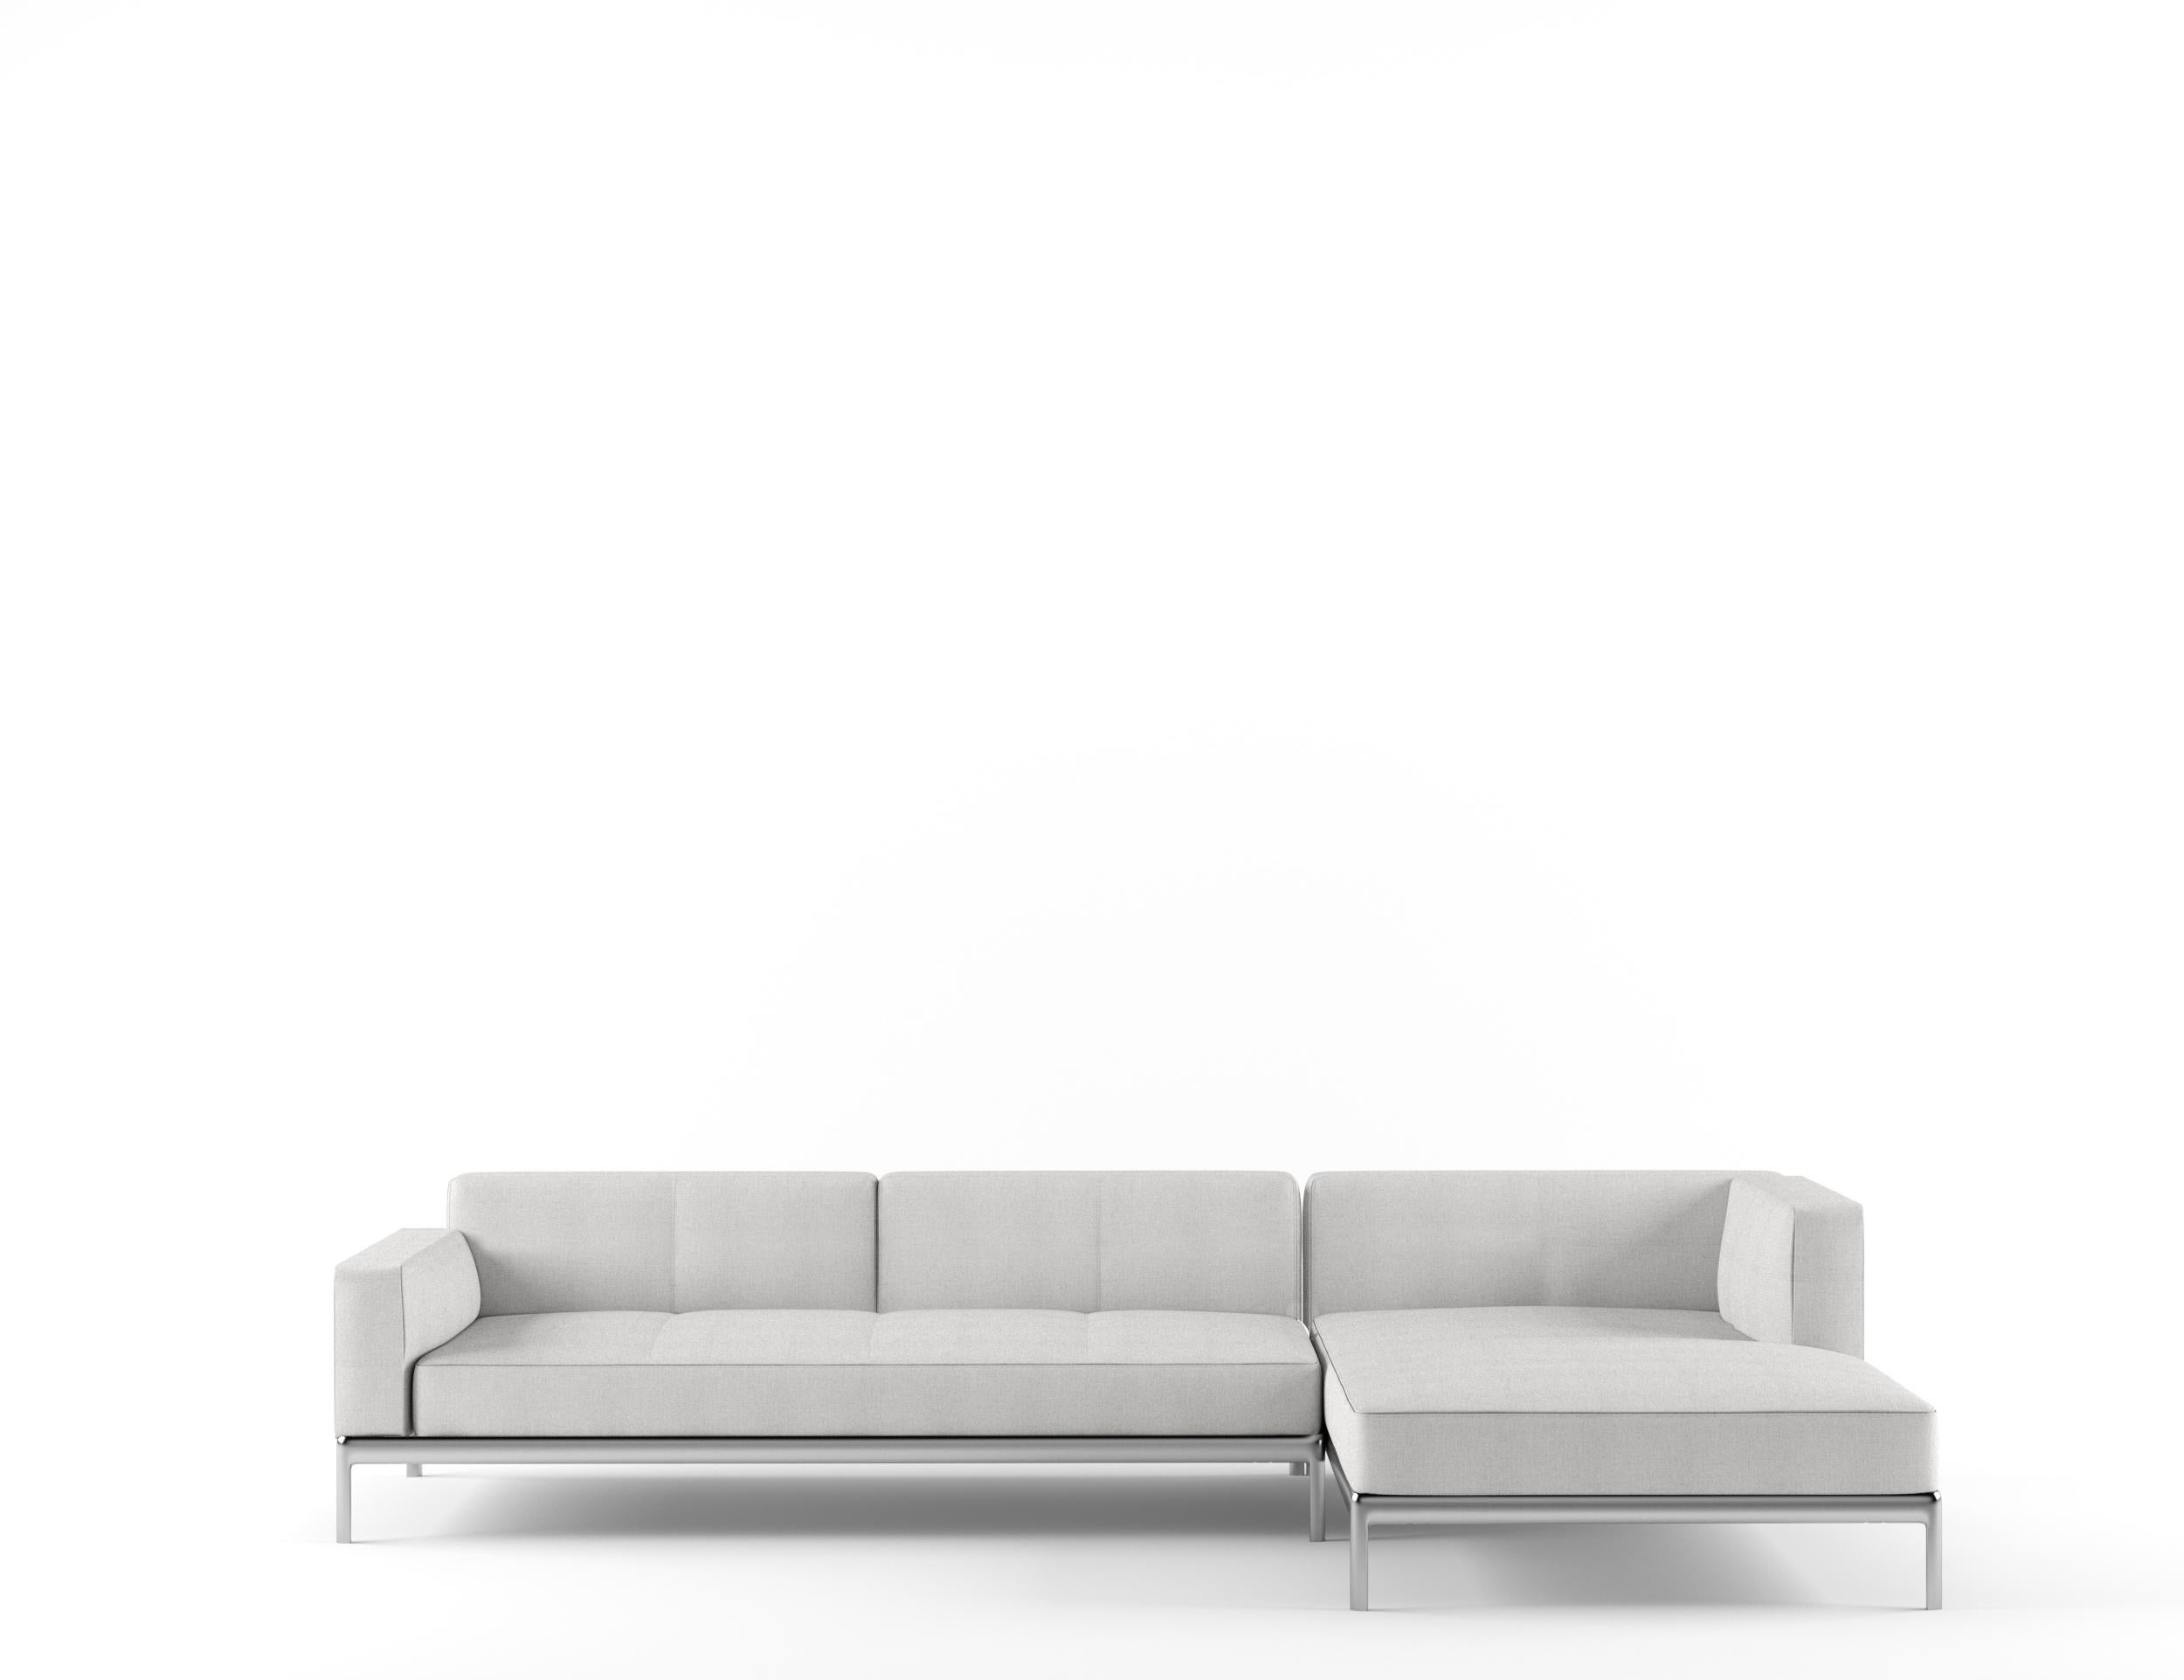 Alias P06+P05 AluZen Sectional Sofa in Upholstery with Polished Aluminium Frame by Ludovica & Roberto Palomba

Modular closing element 175x95 cm.
Modular 2- seater closing element with structure in lacquered or polished aluminium. Seat, back and